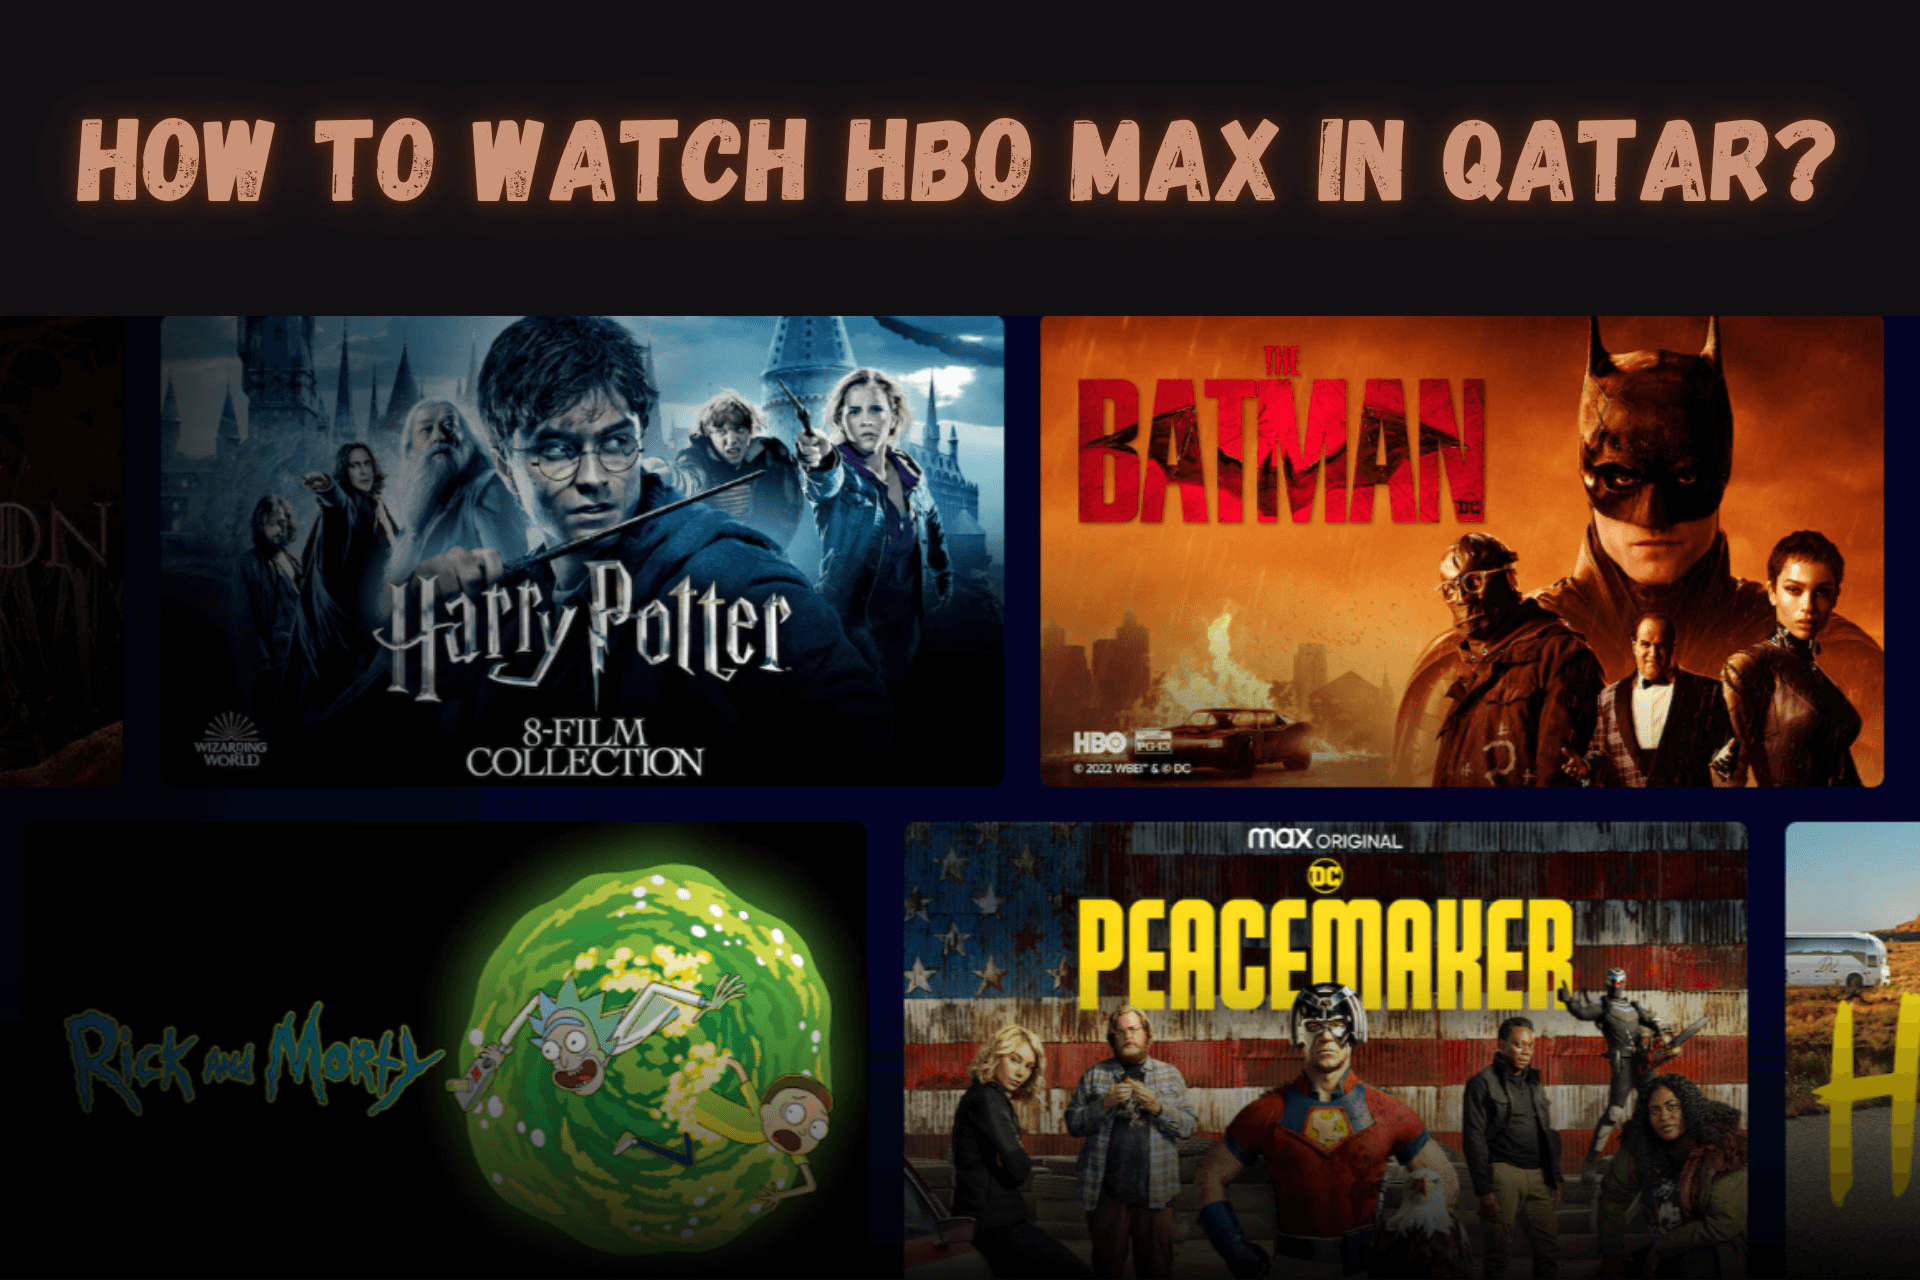 How to Watch HBO Max in Qatar